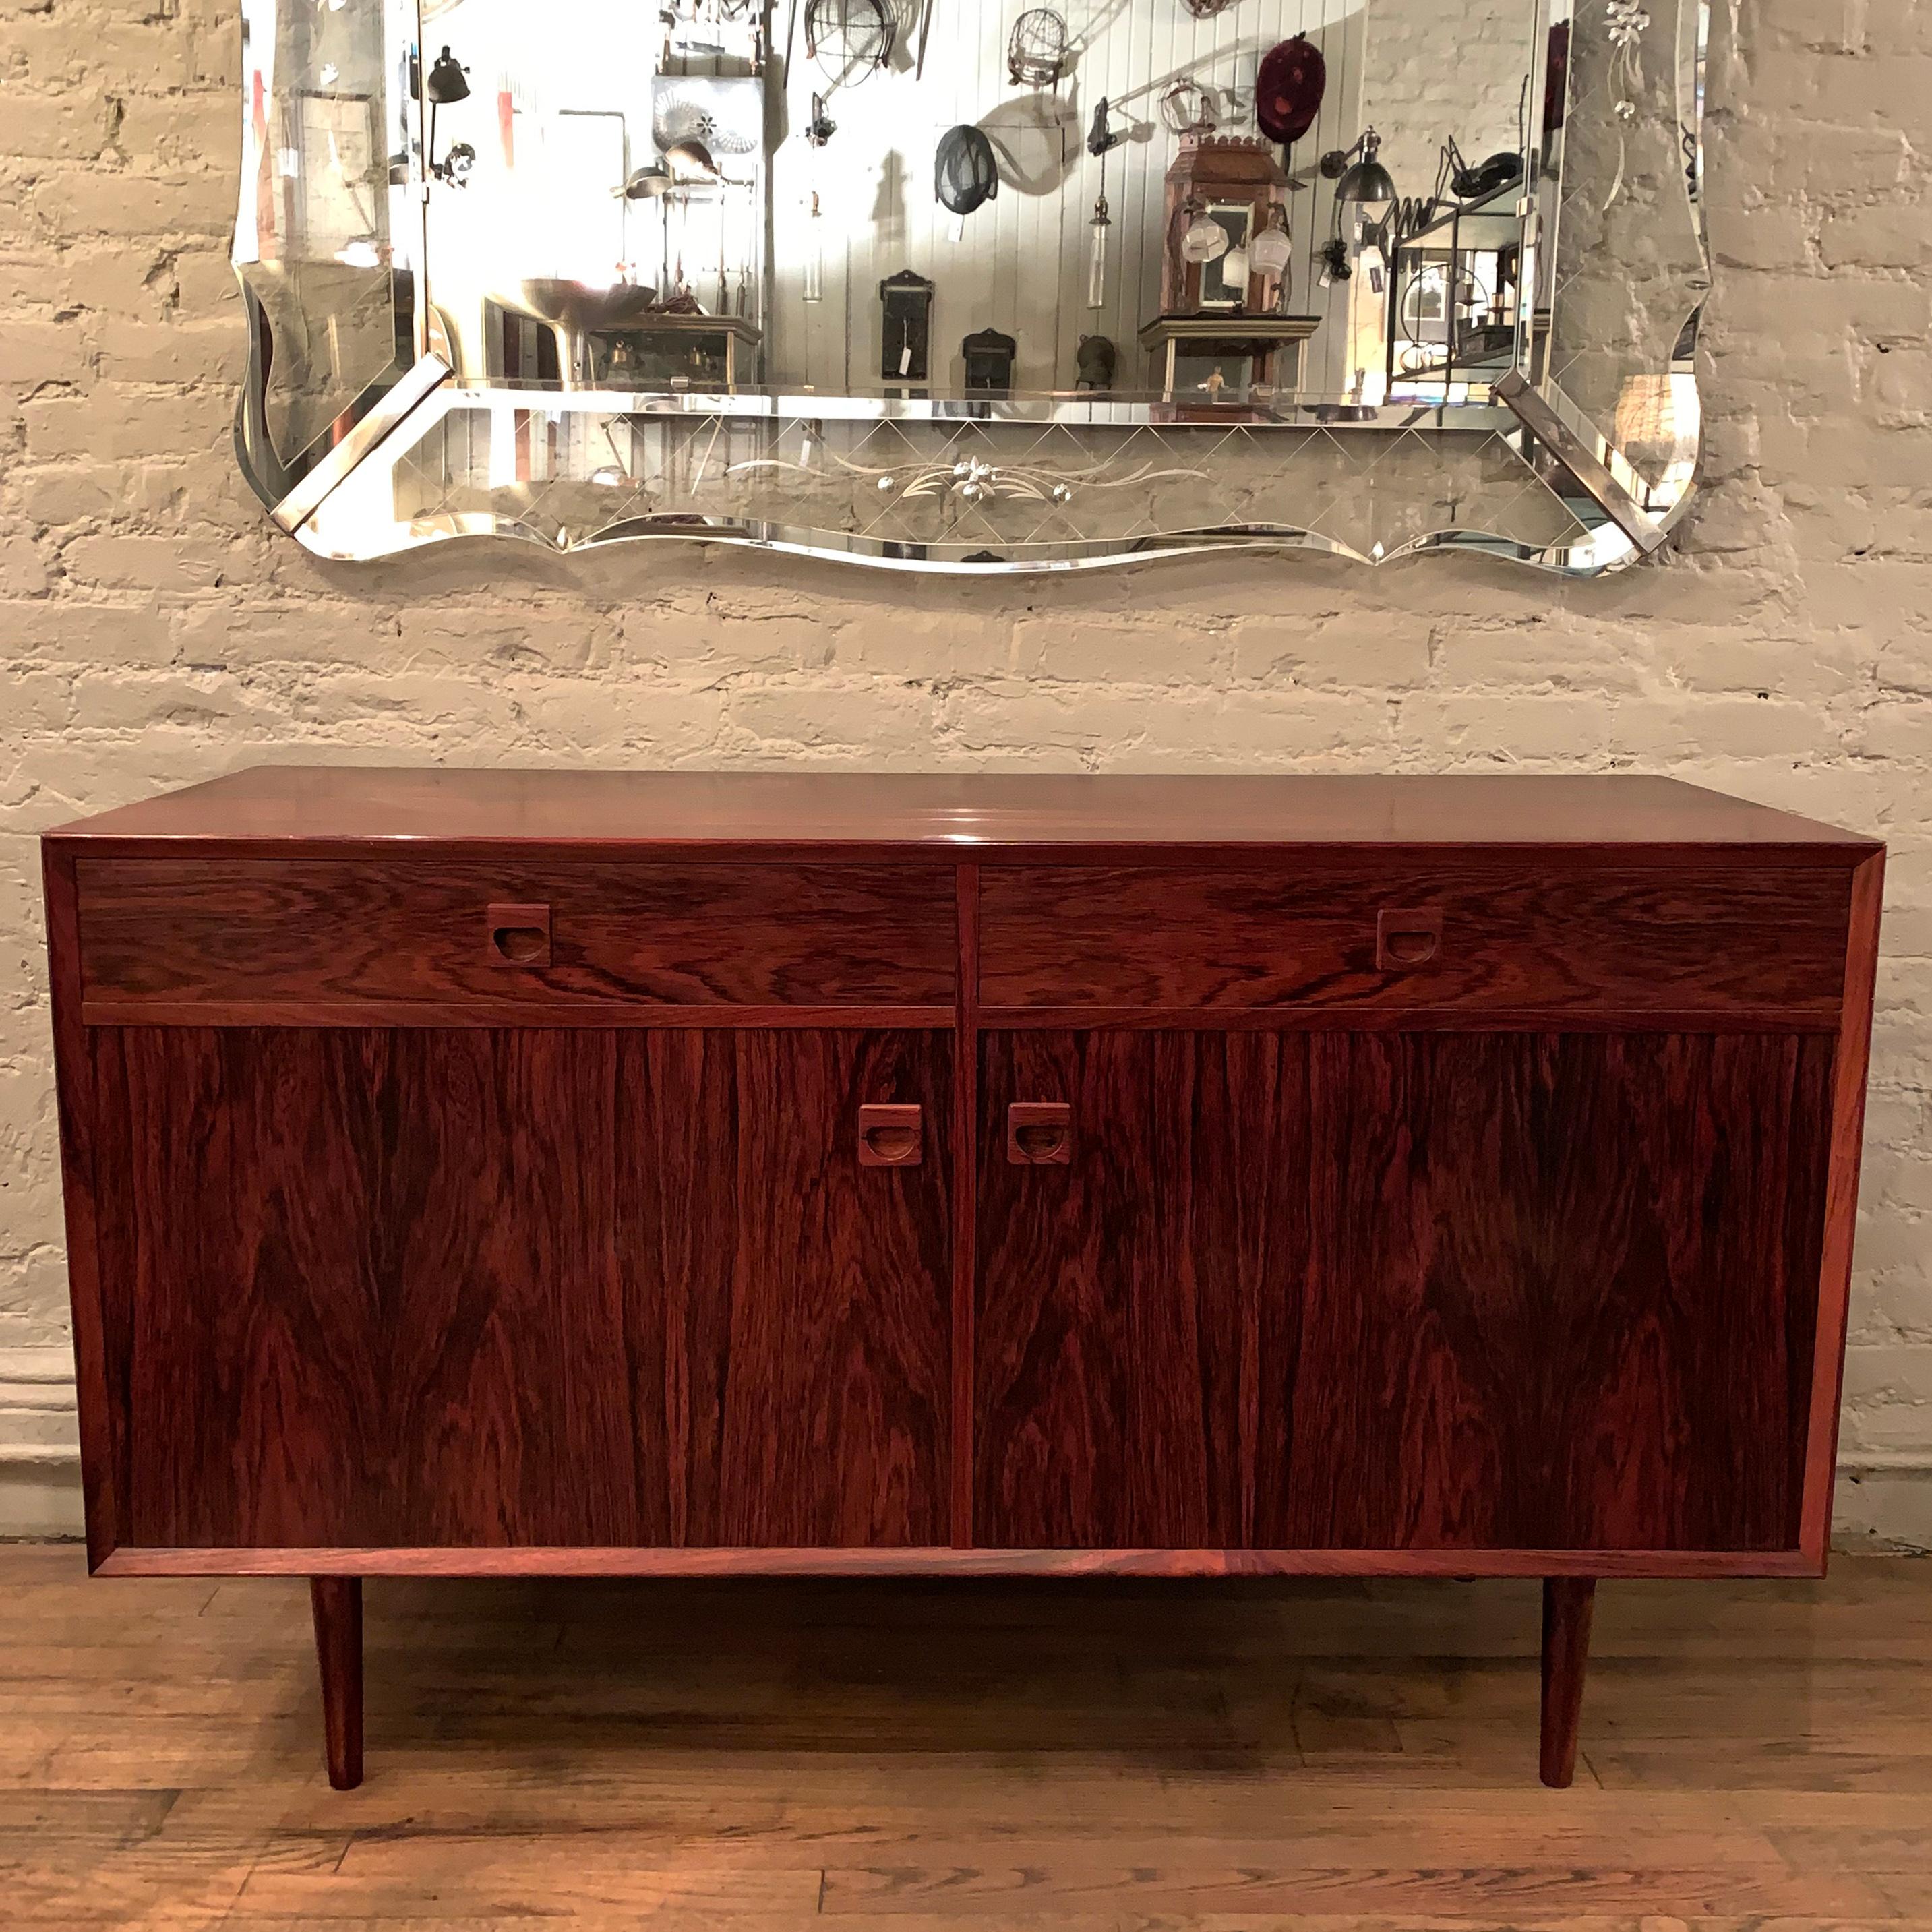 Neatly sized, Danish modern, rosewood sideboard / credenza by E. Brouer for Brouer Møbelfabrik features top drawer and cabinet storage below.